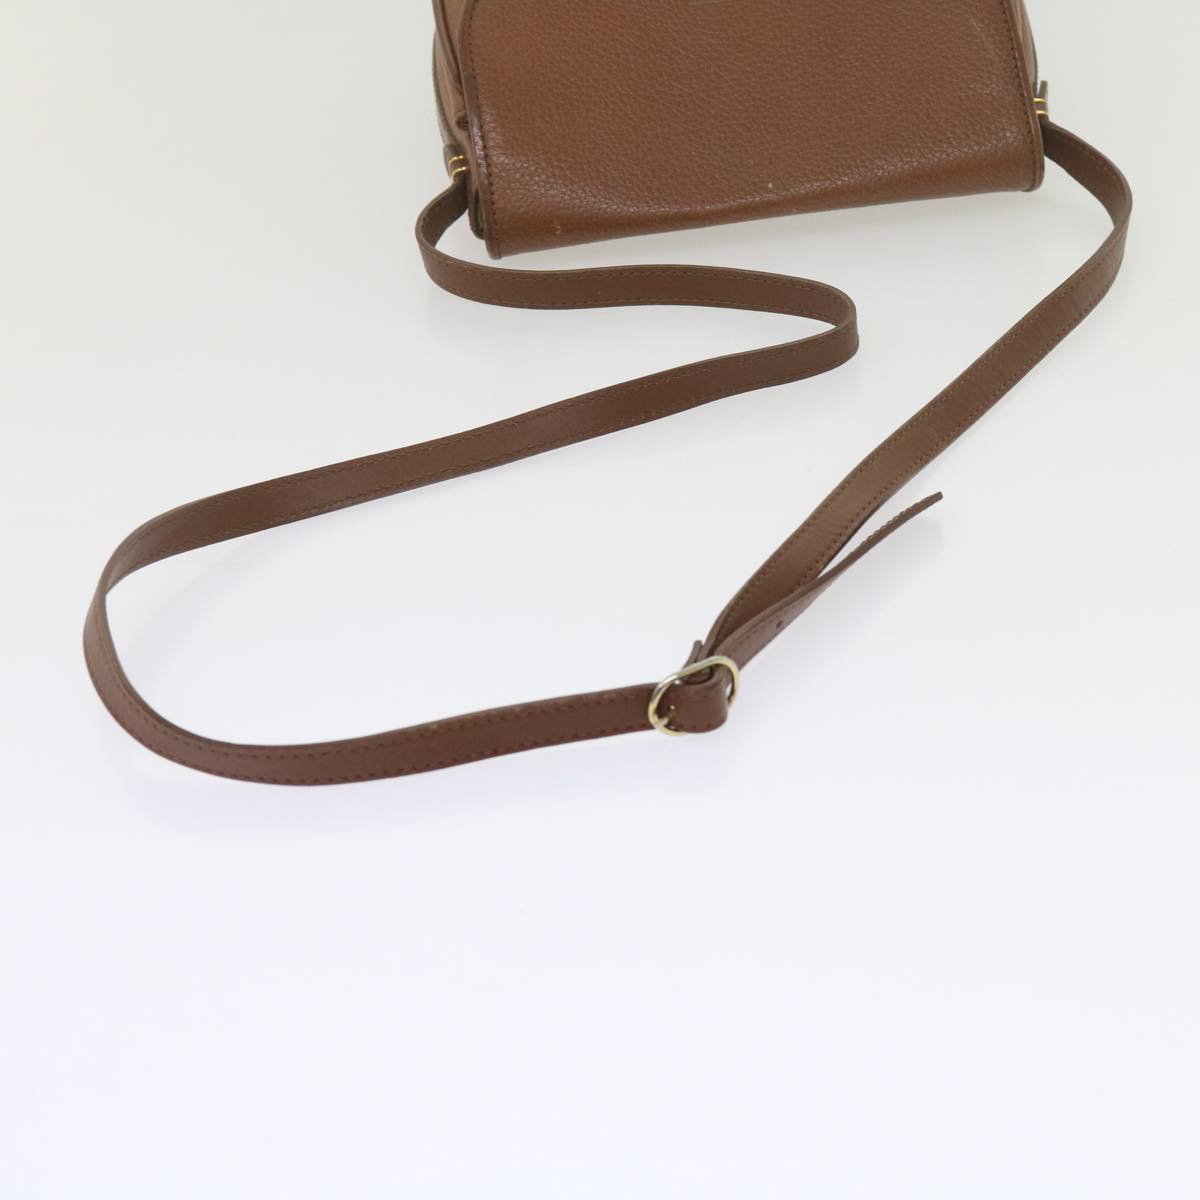 Burberrys Shoulder Bag Leather Brown Auth ep2643